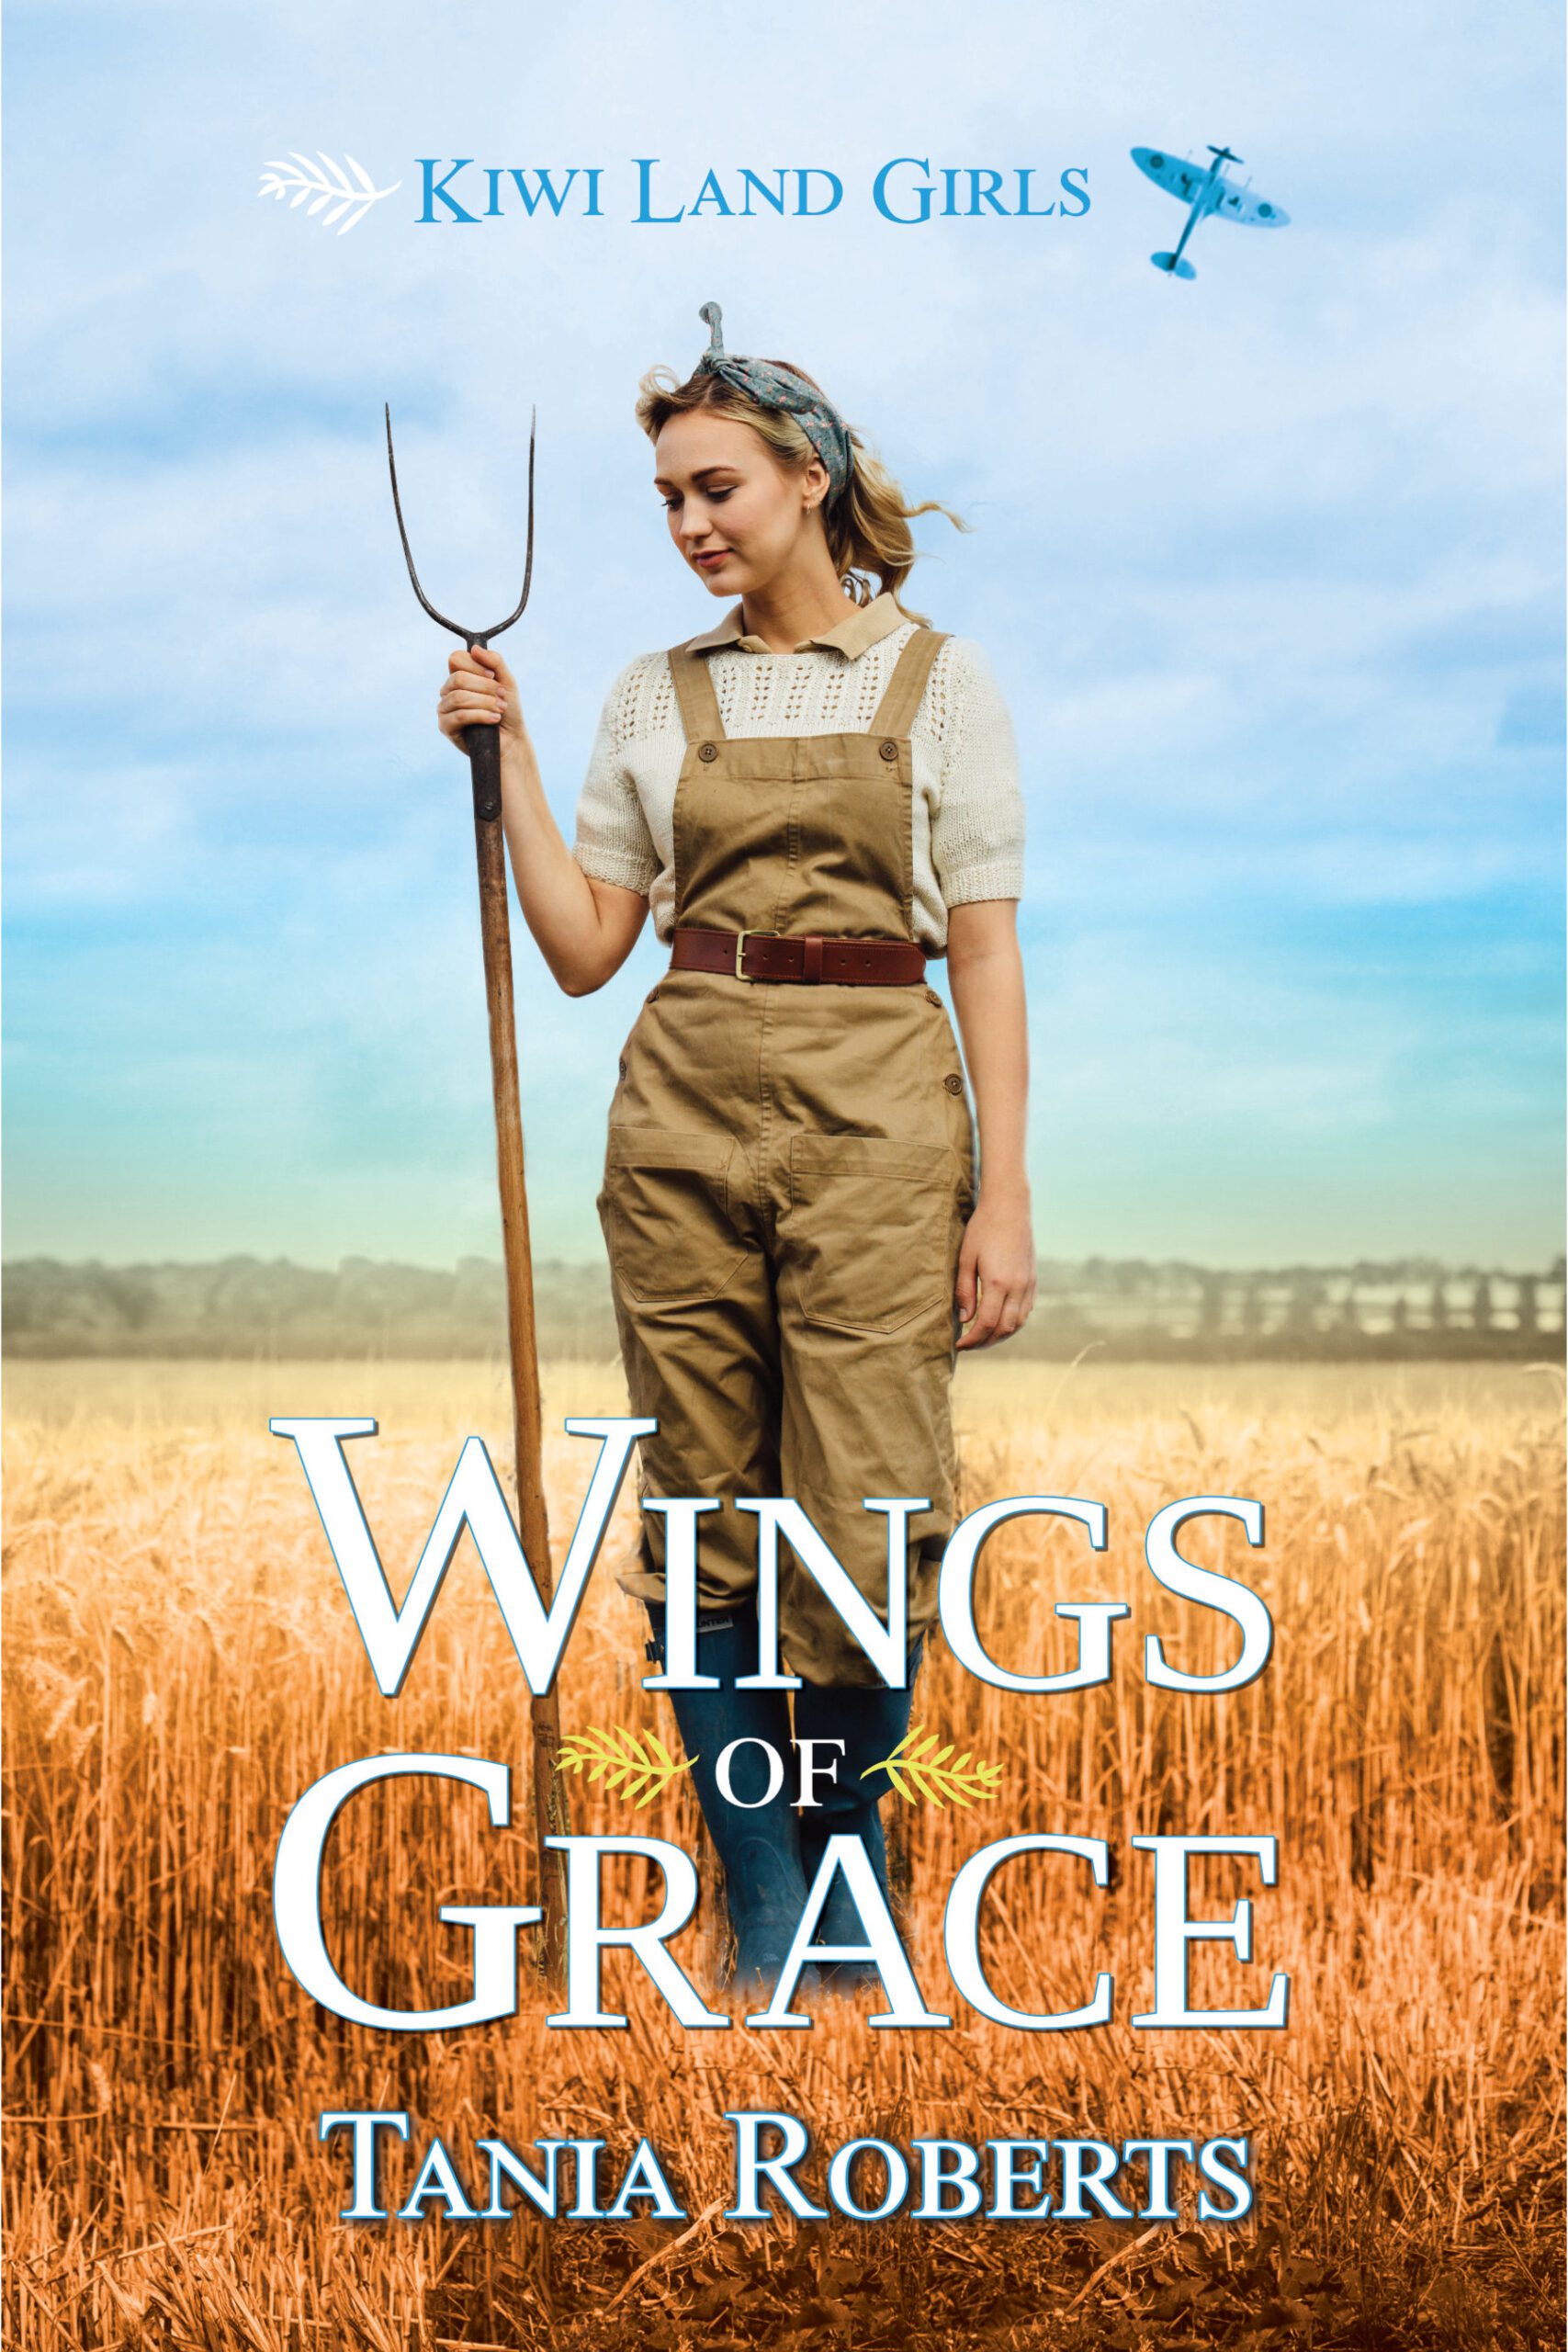 Wings of Grace by Tania Roberts book cover